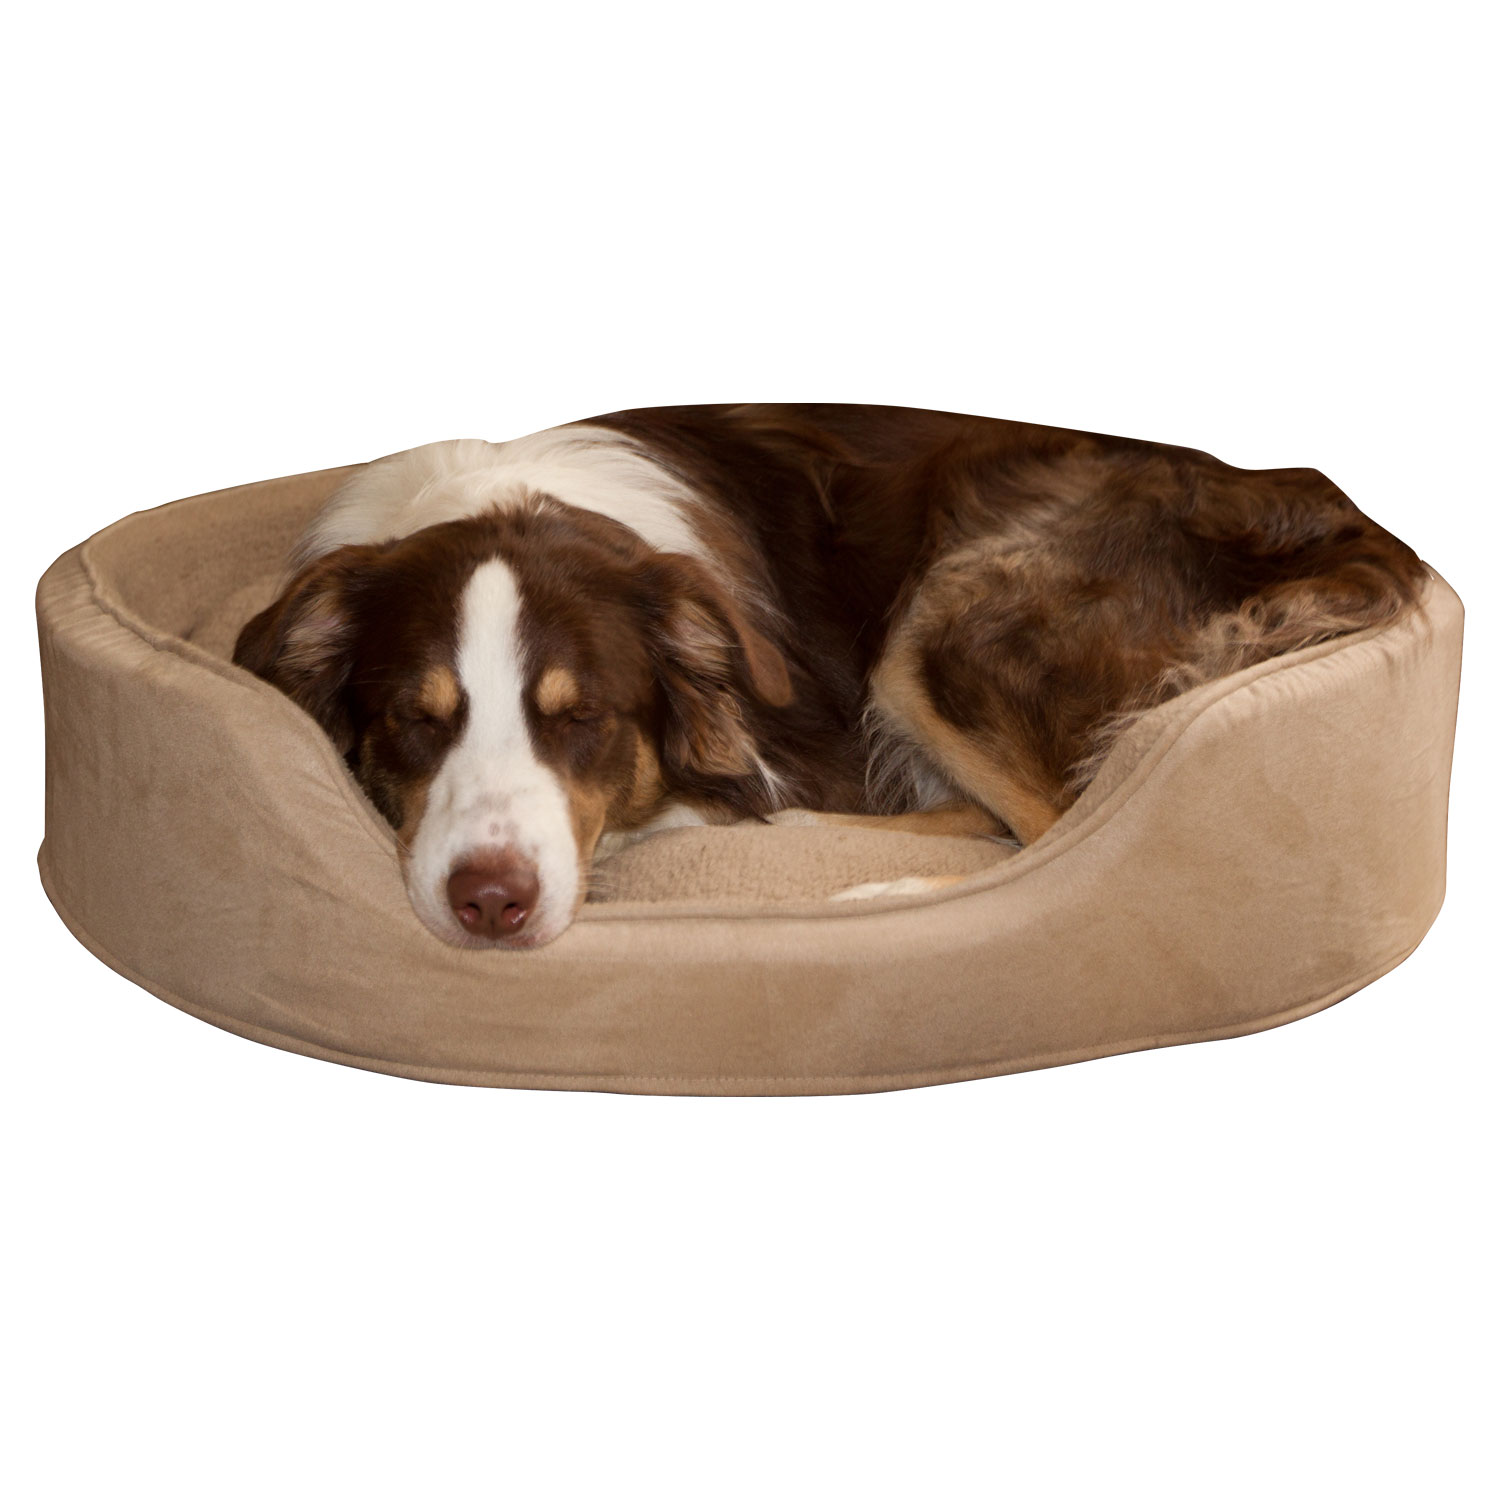 PAW Cuddle Round Suede Terry Pet Bed - Clay - Small